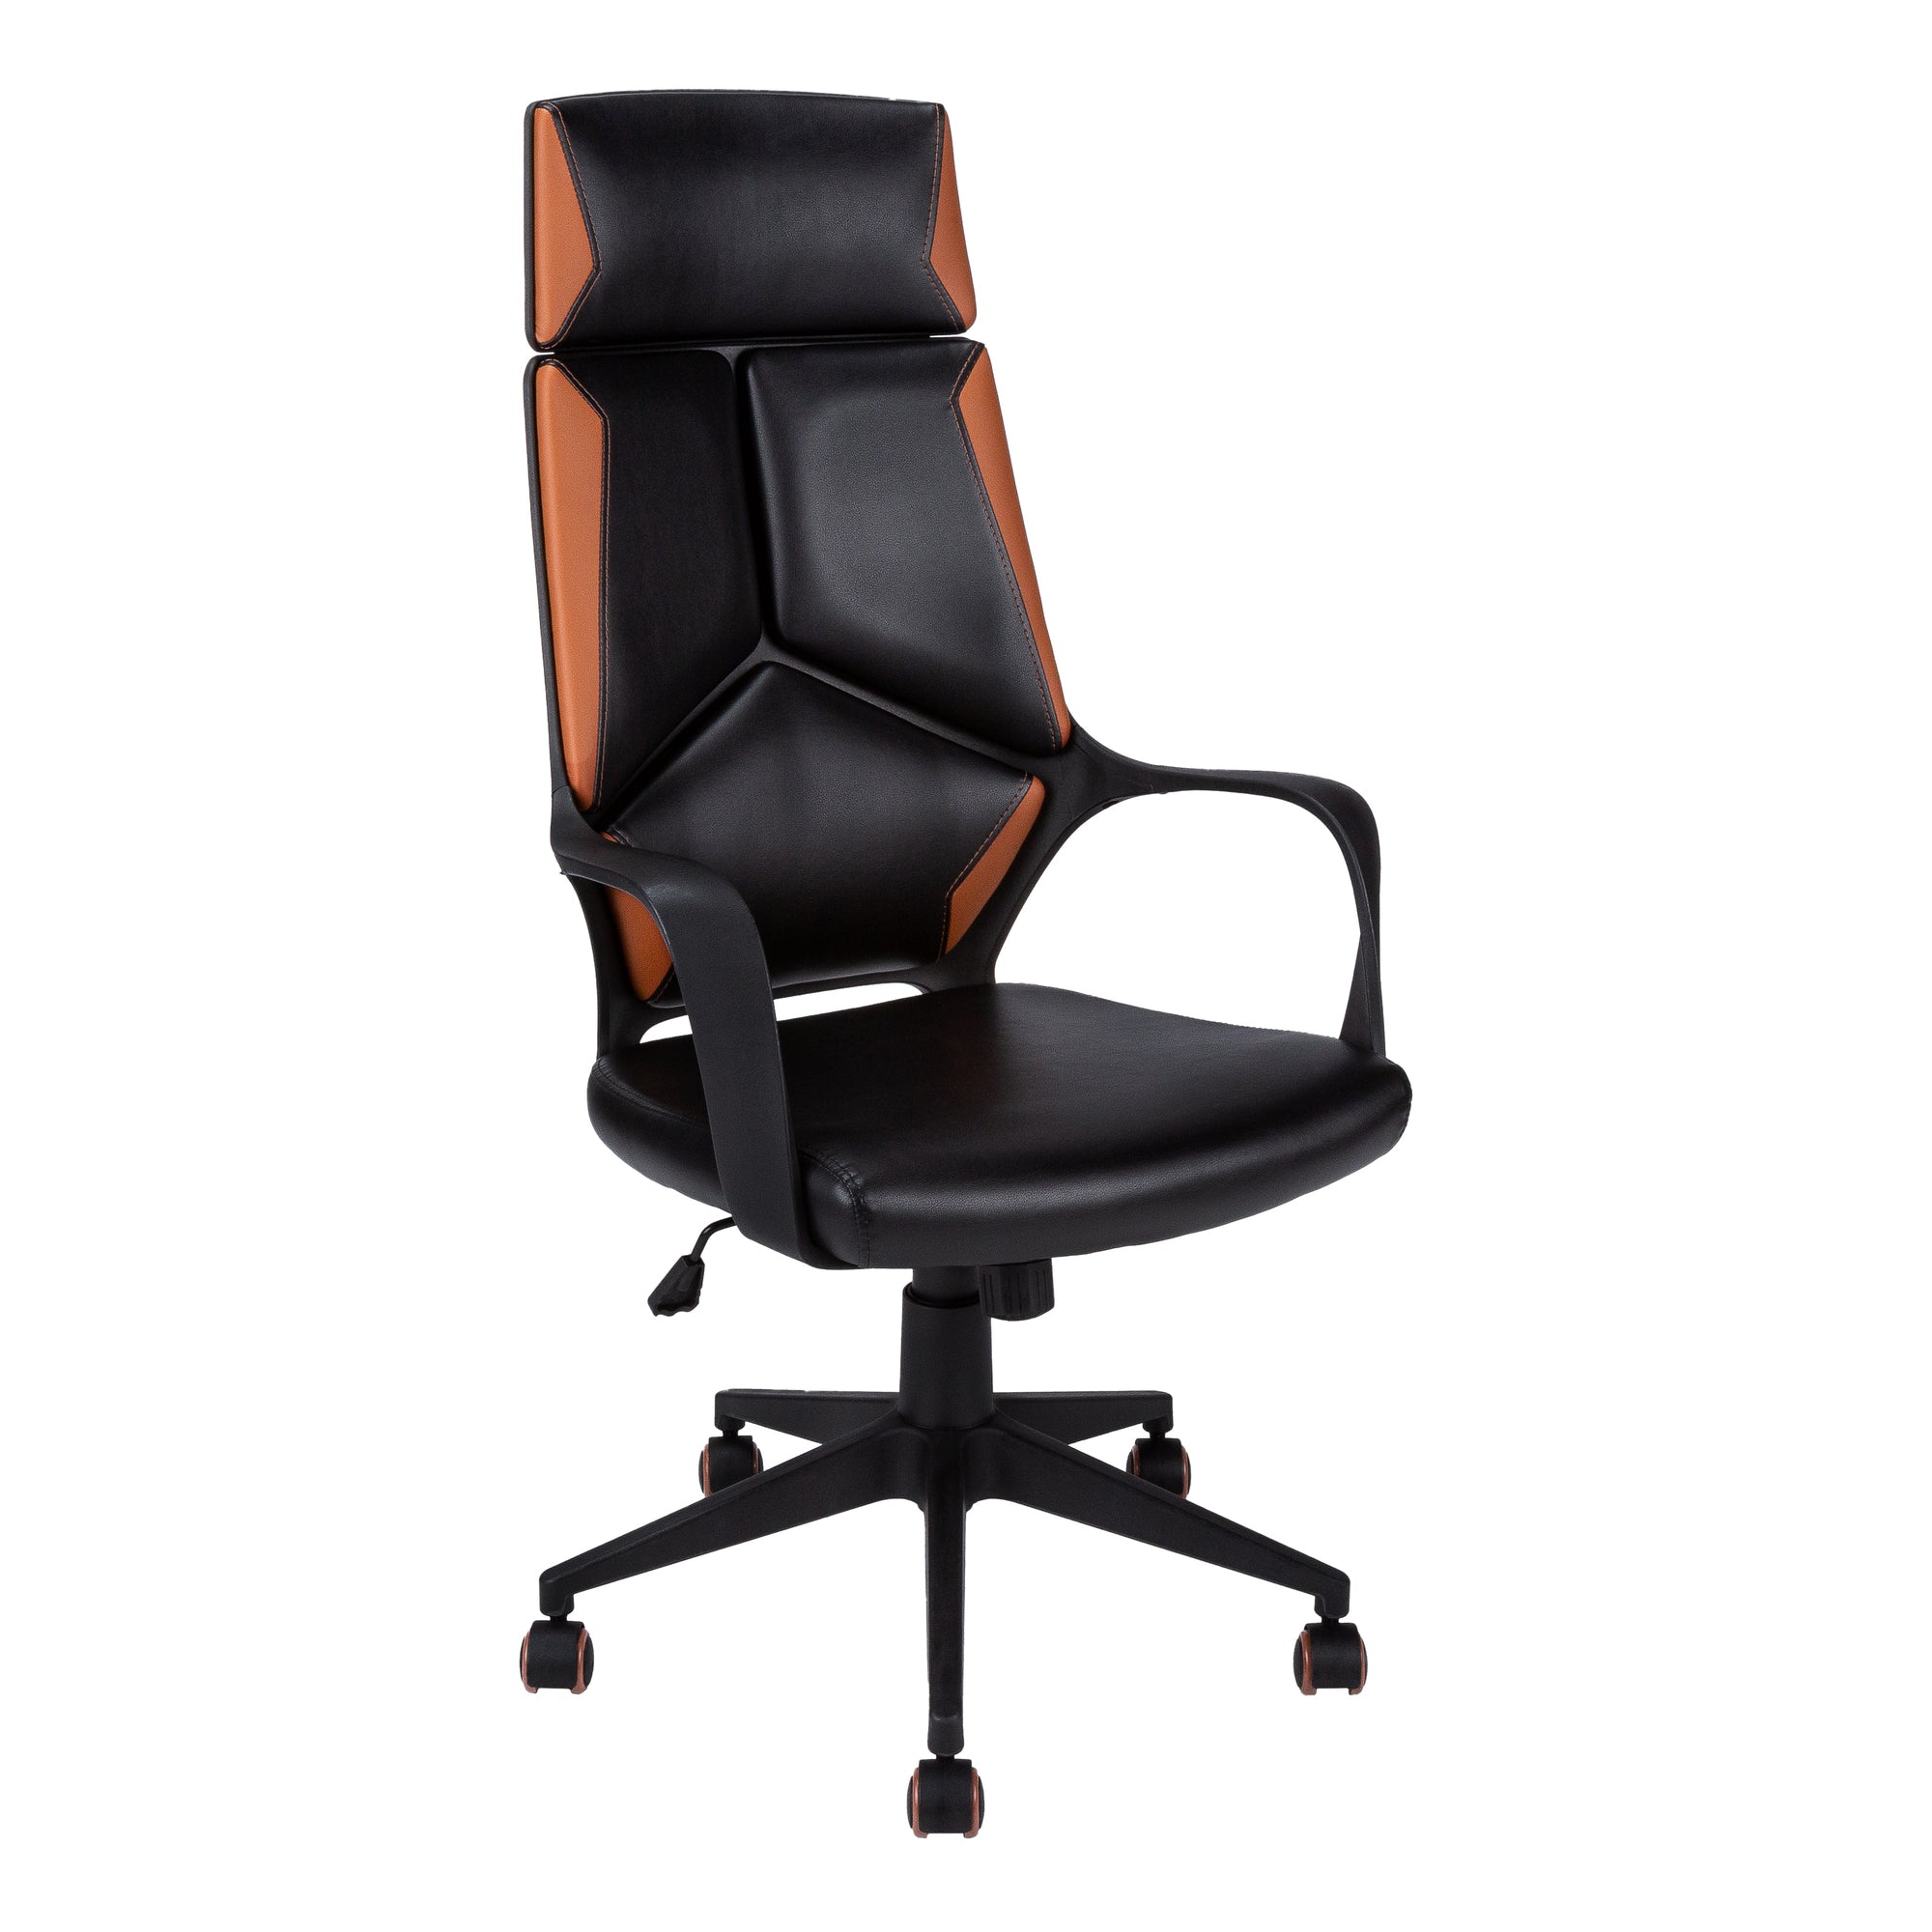 Office Chair - Black / Brown Leather-Look / Executive